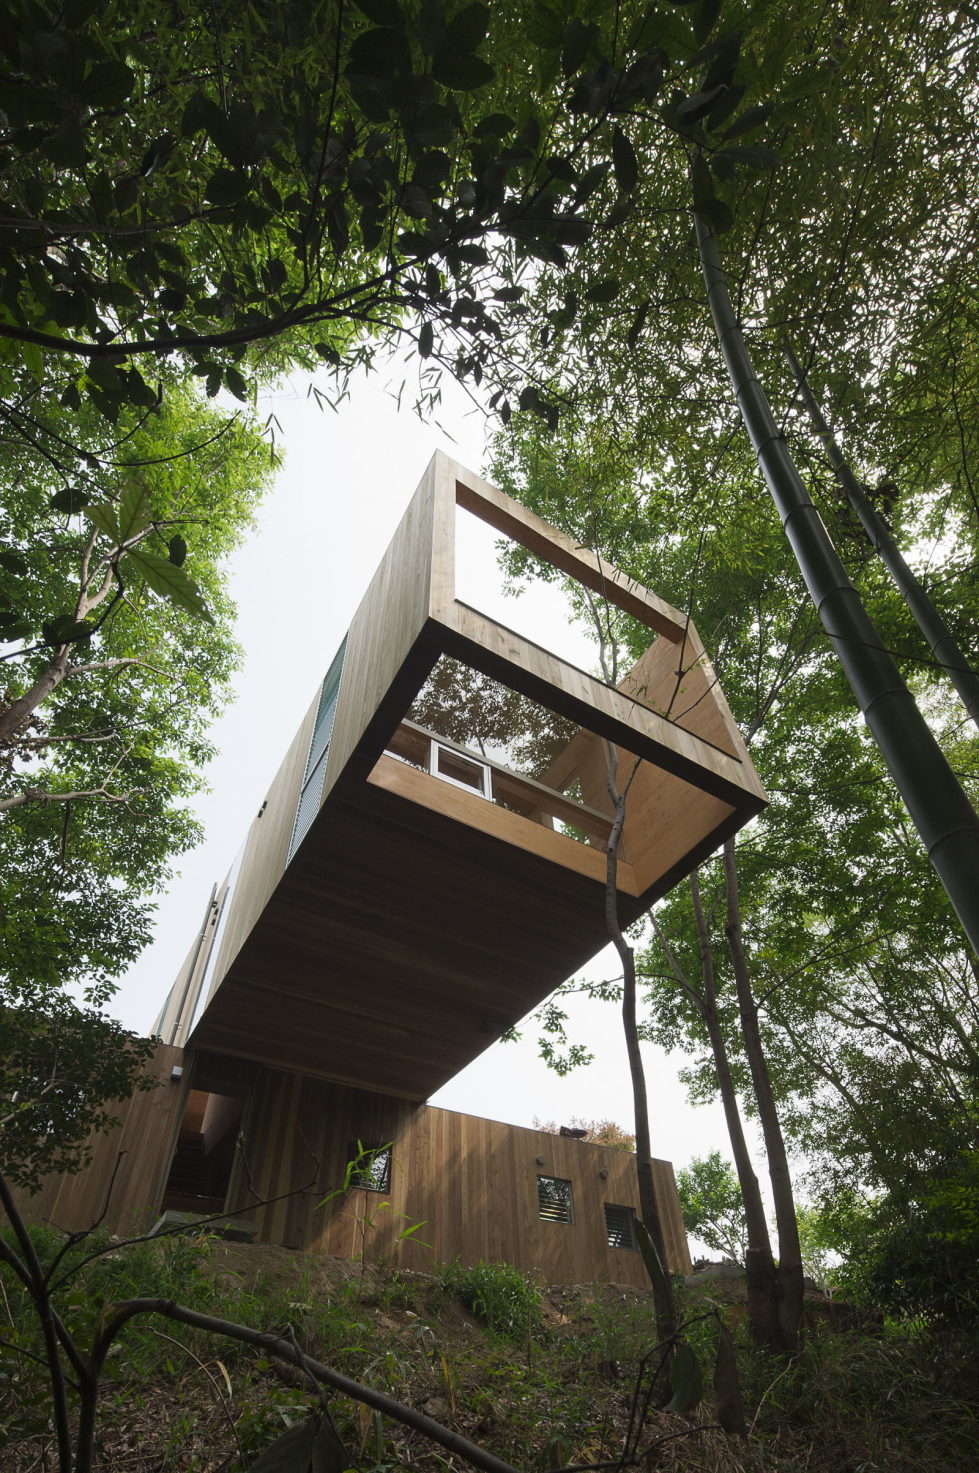 The pendulous over the forest house '+ node' from the UID Architects 4